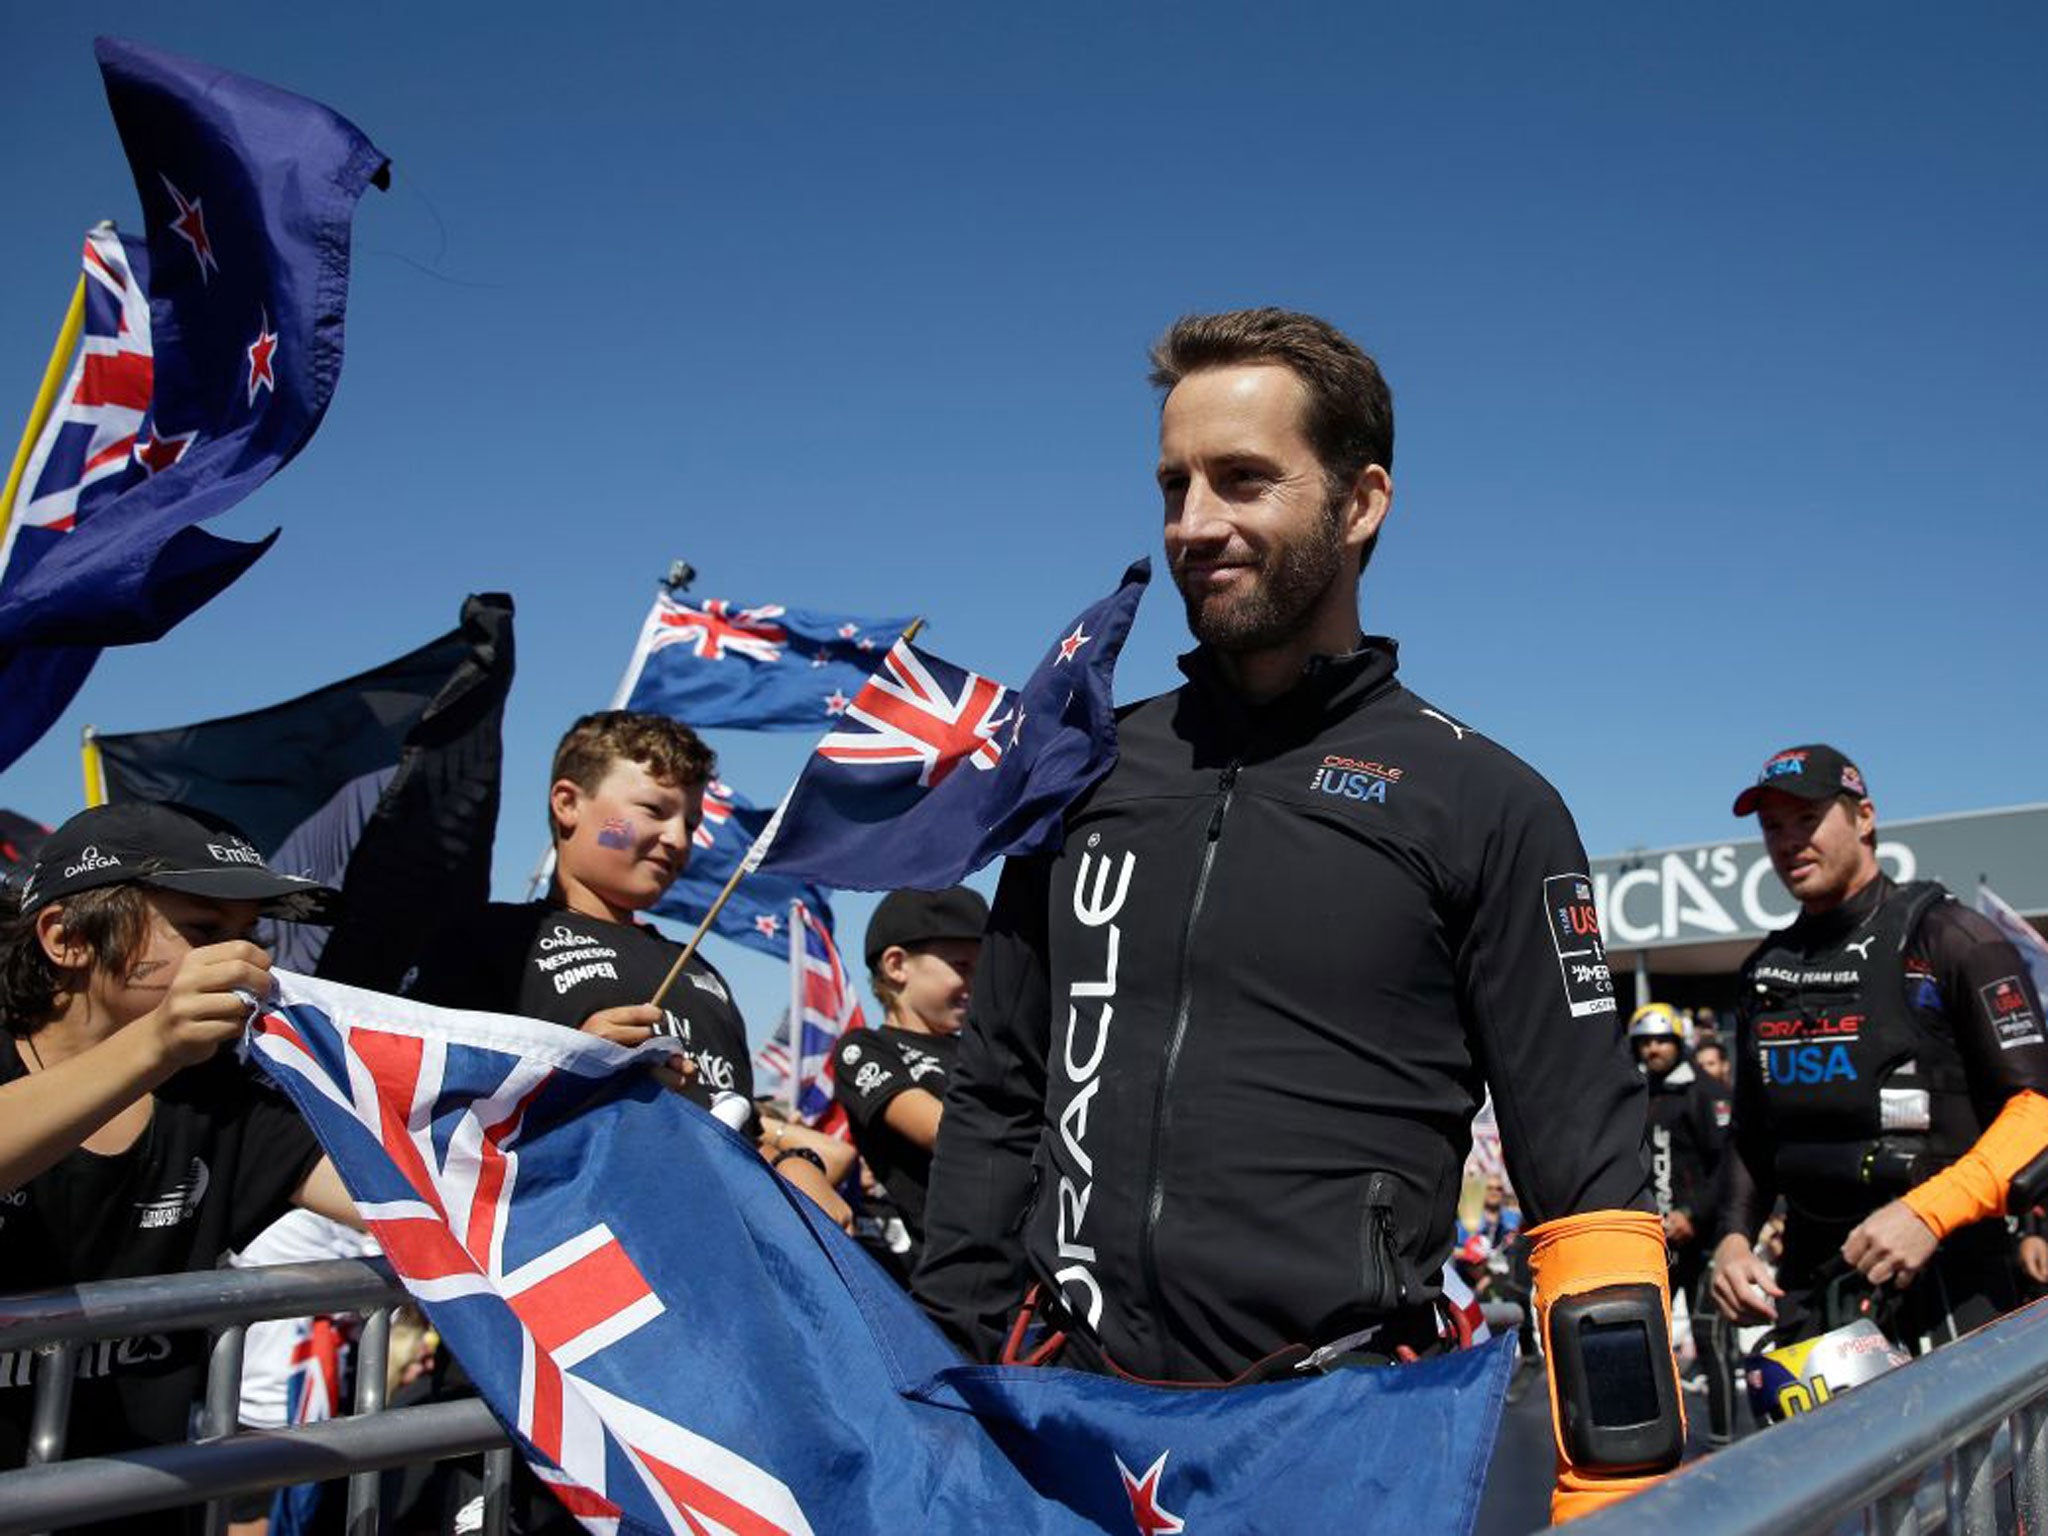 Ben Ainslie, the ruthless victor of the America’s Cup, leading the Oracle team on Wednesday